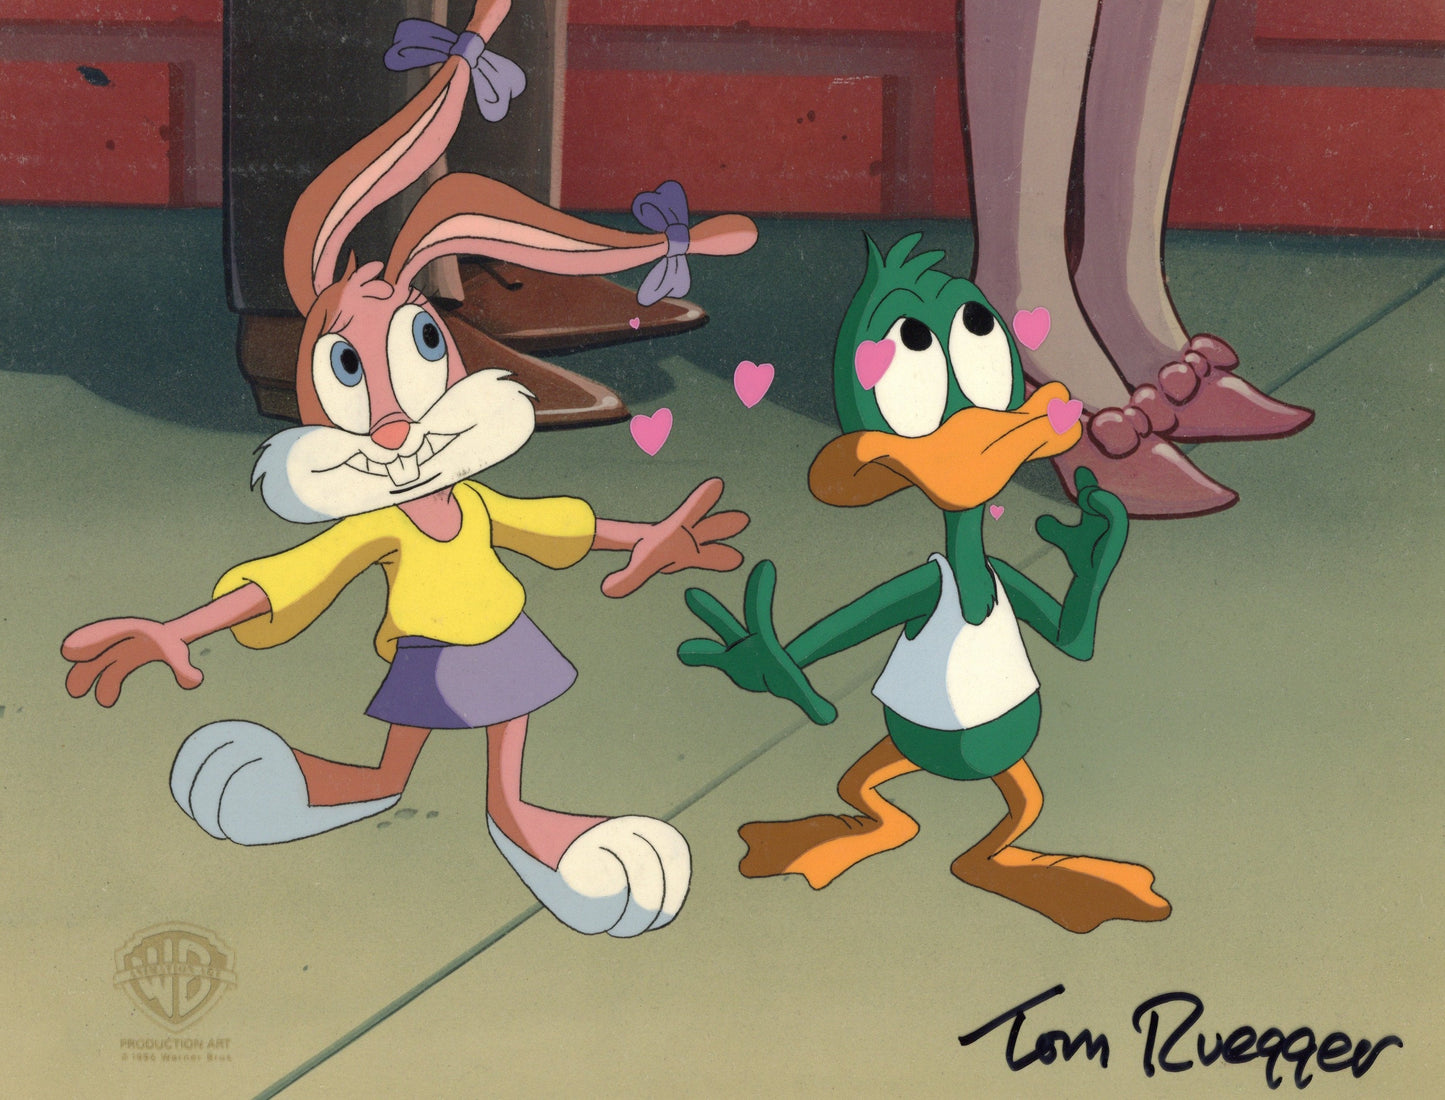 Tiny Toons Adventures Original Production Cel signed by Tom Ruegger: Babs Bunny, Plucky